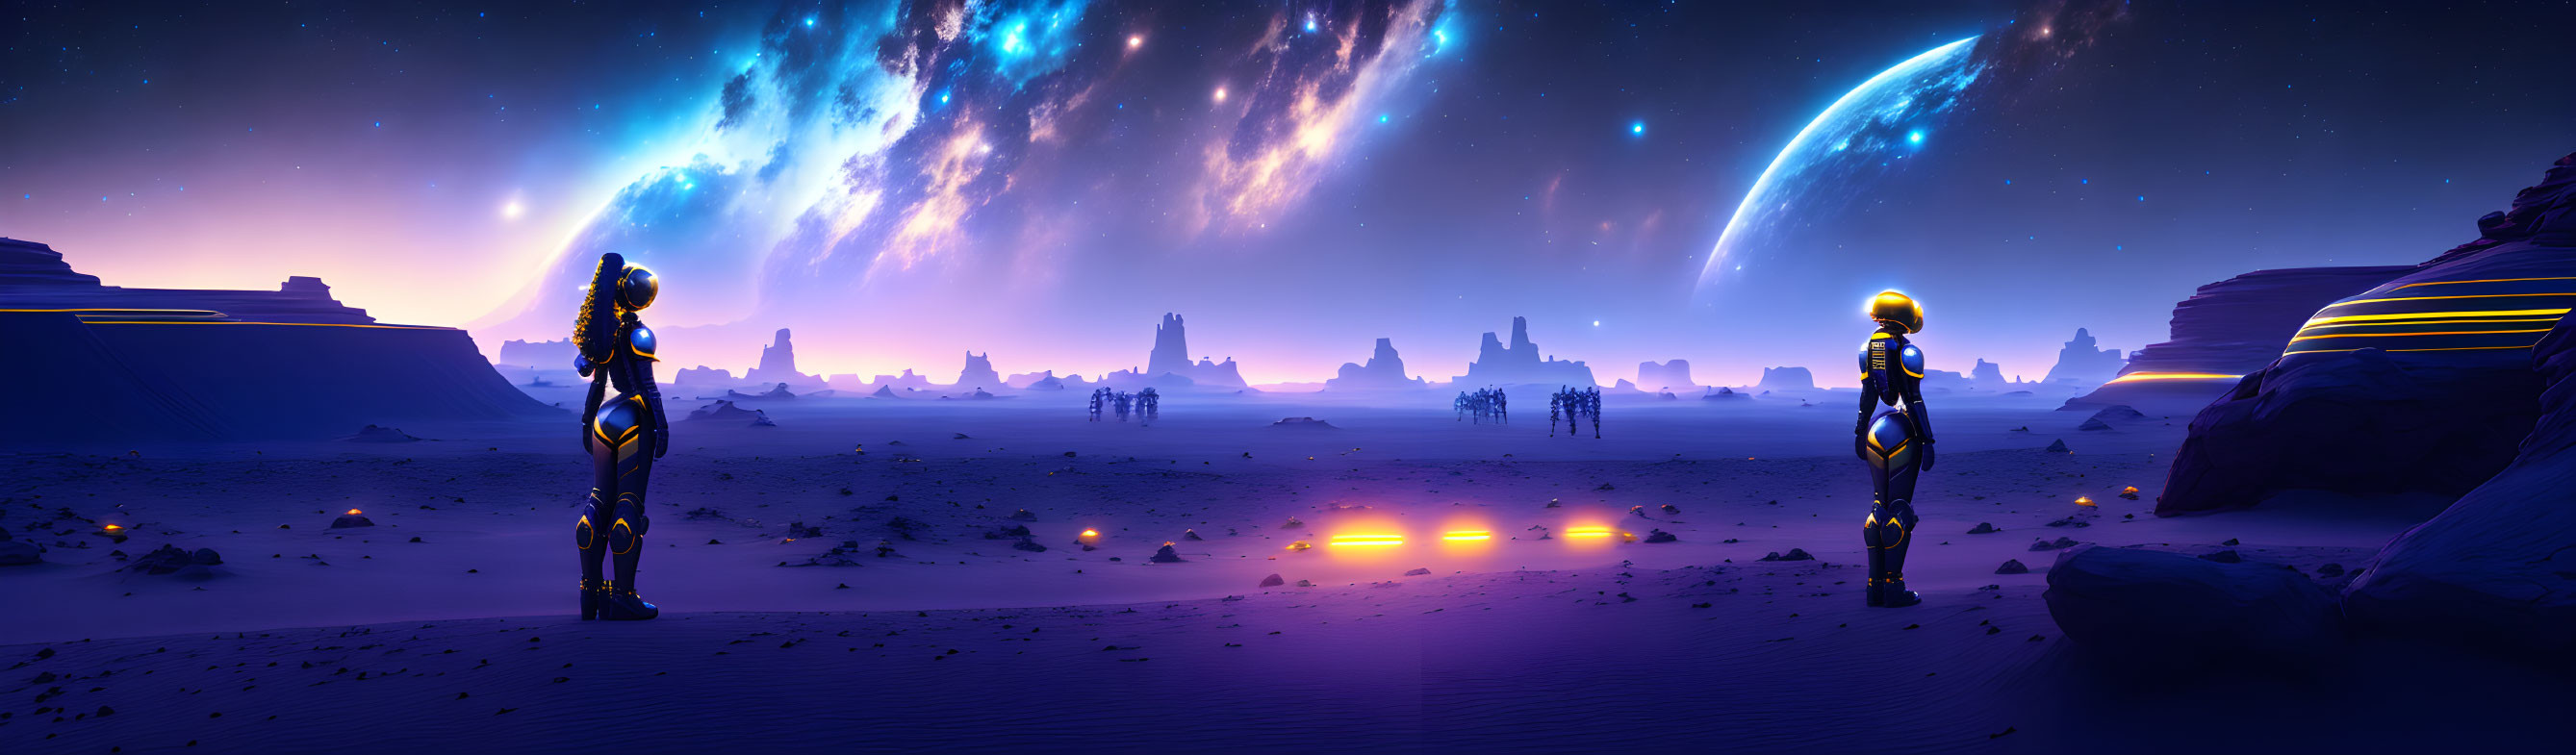 Futuristic figures on alien desert with galaxy and shooting stars